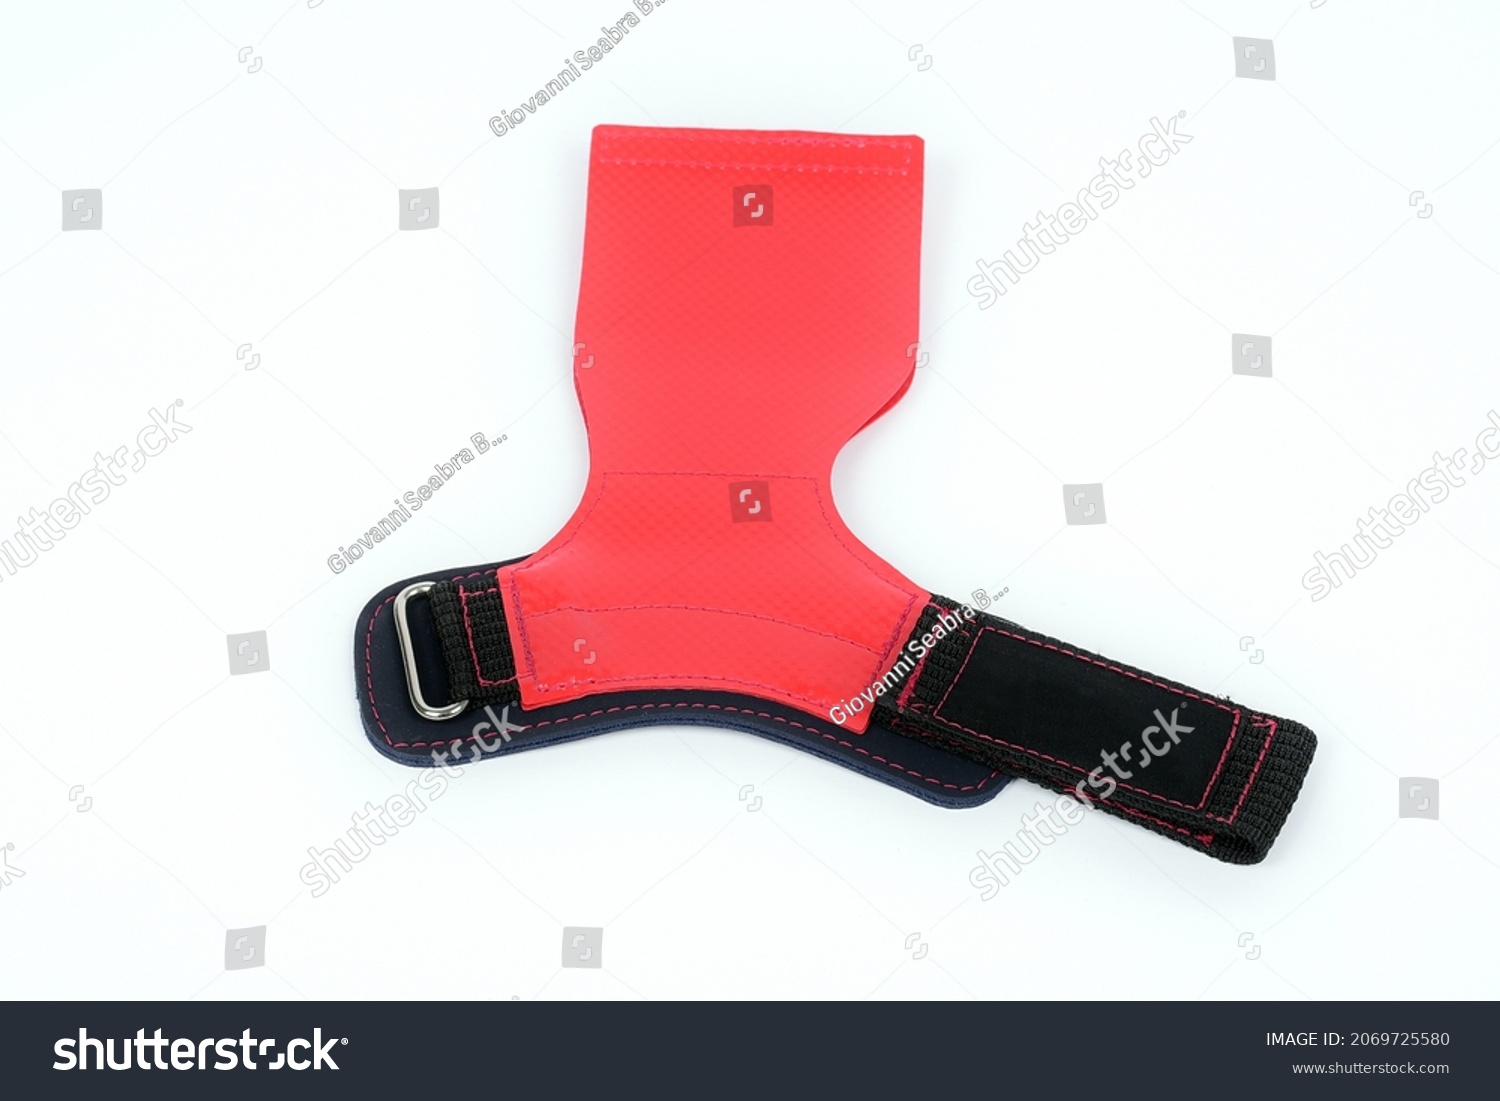 Elastic knee brace for physical training, crossfit, physiotherapy, body health, exercise, pilates, yoga and bodybuilding isolated on white background. #2069725580